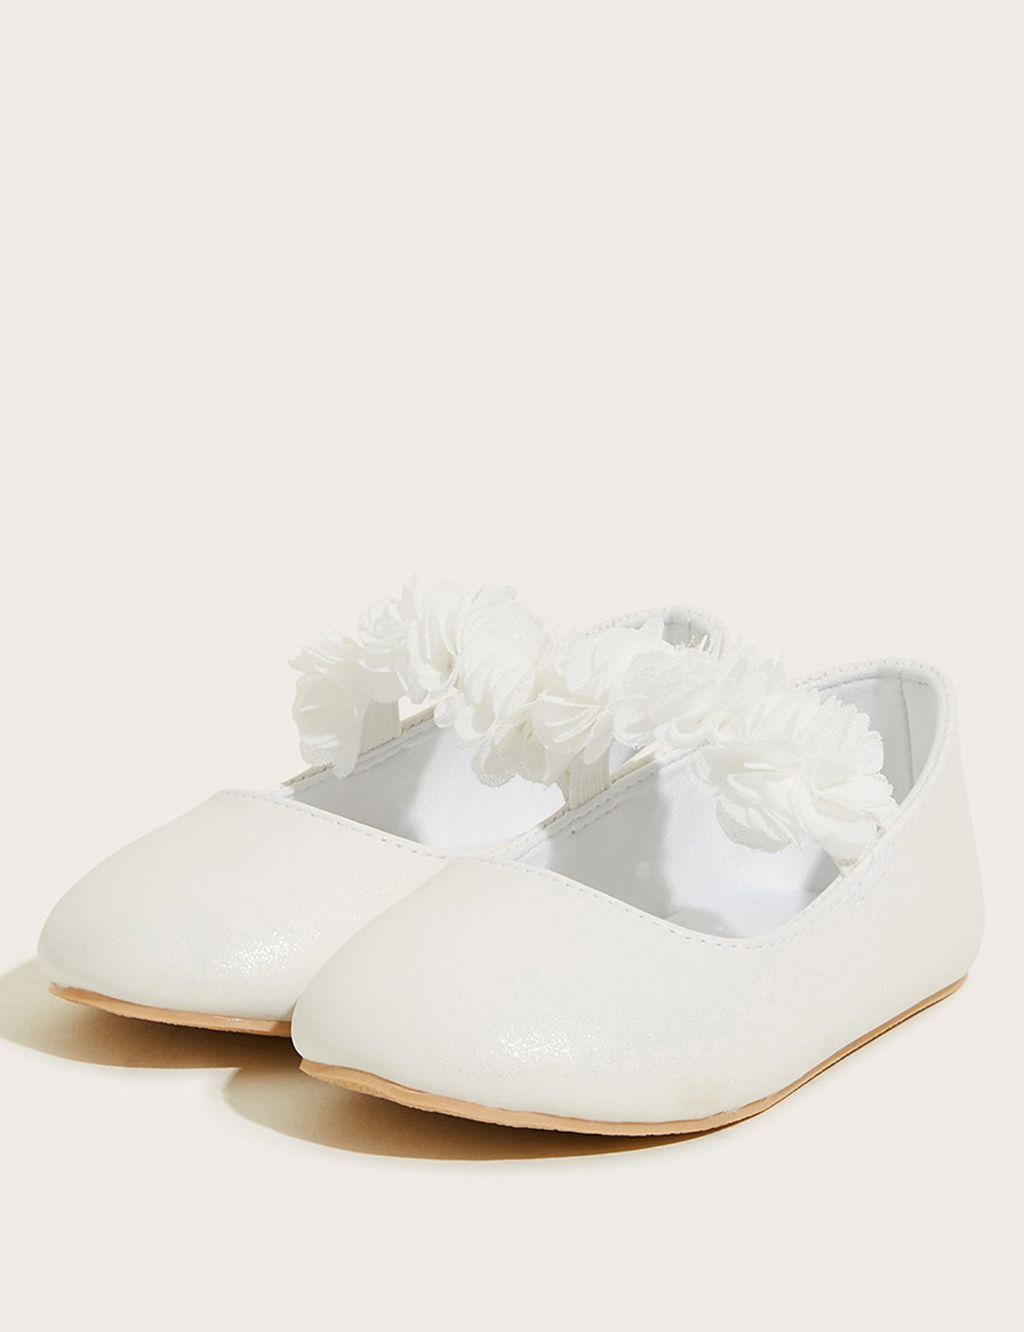 Baby Floral Ballerina Party Shoes image 2